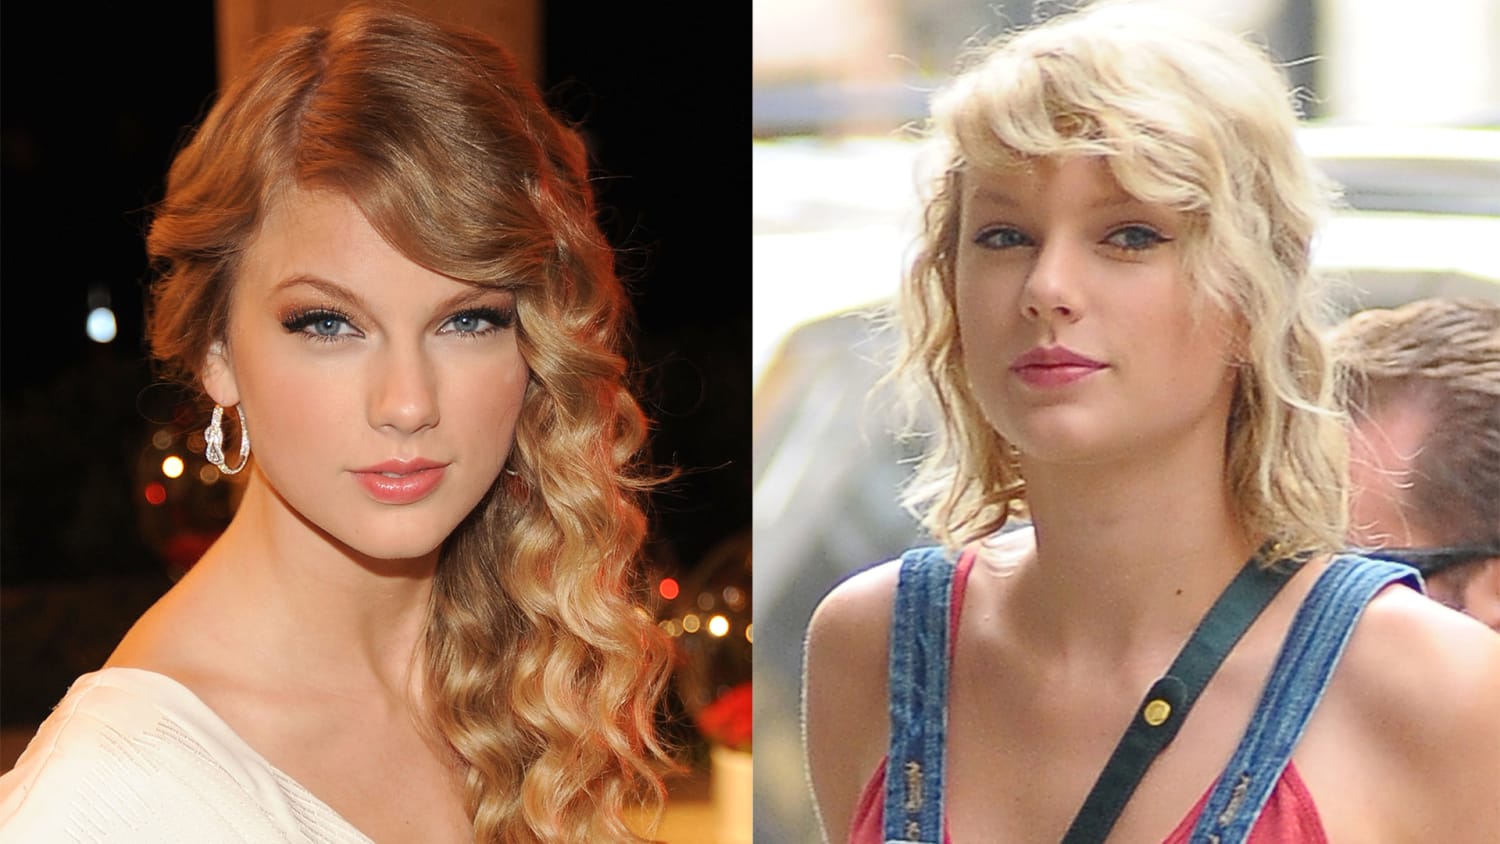 2. "Taylor Swift's Hair Evolution: From Curly to Straight, Blonde to Brunette" - wide 10